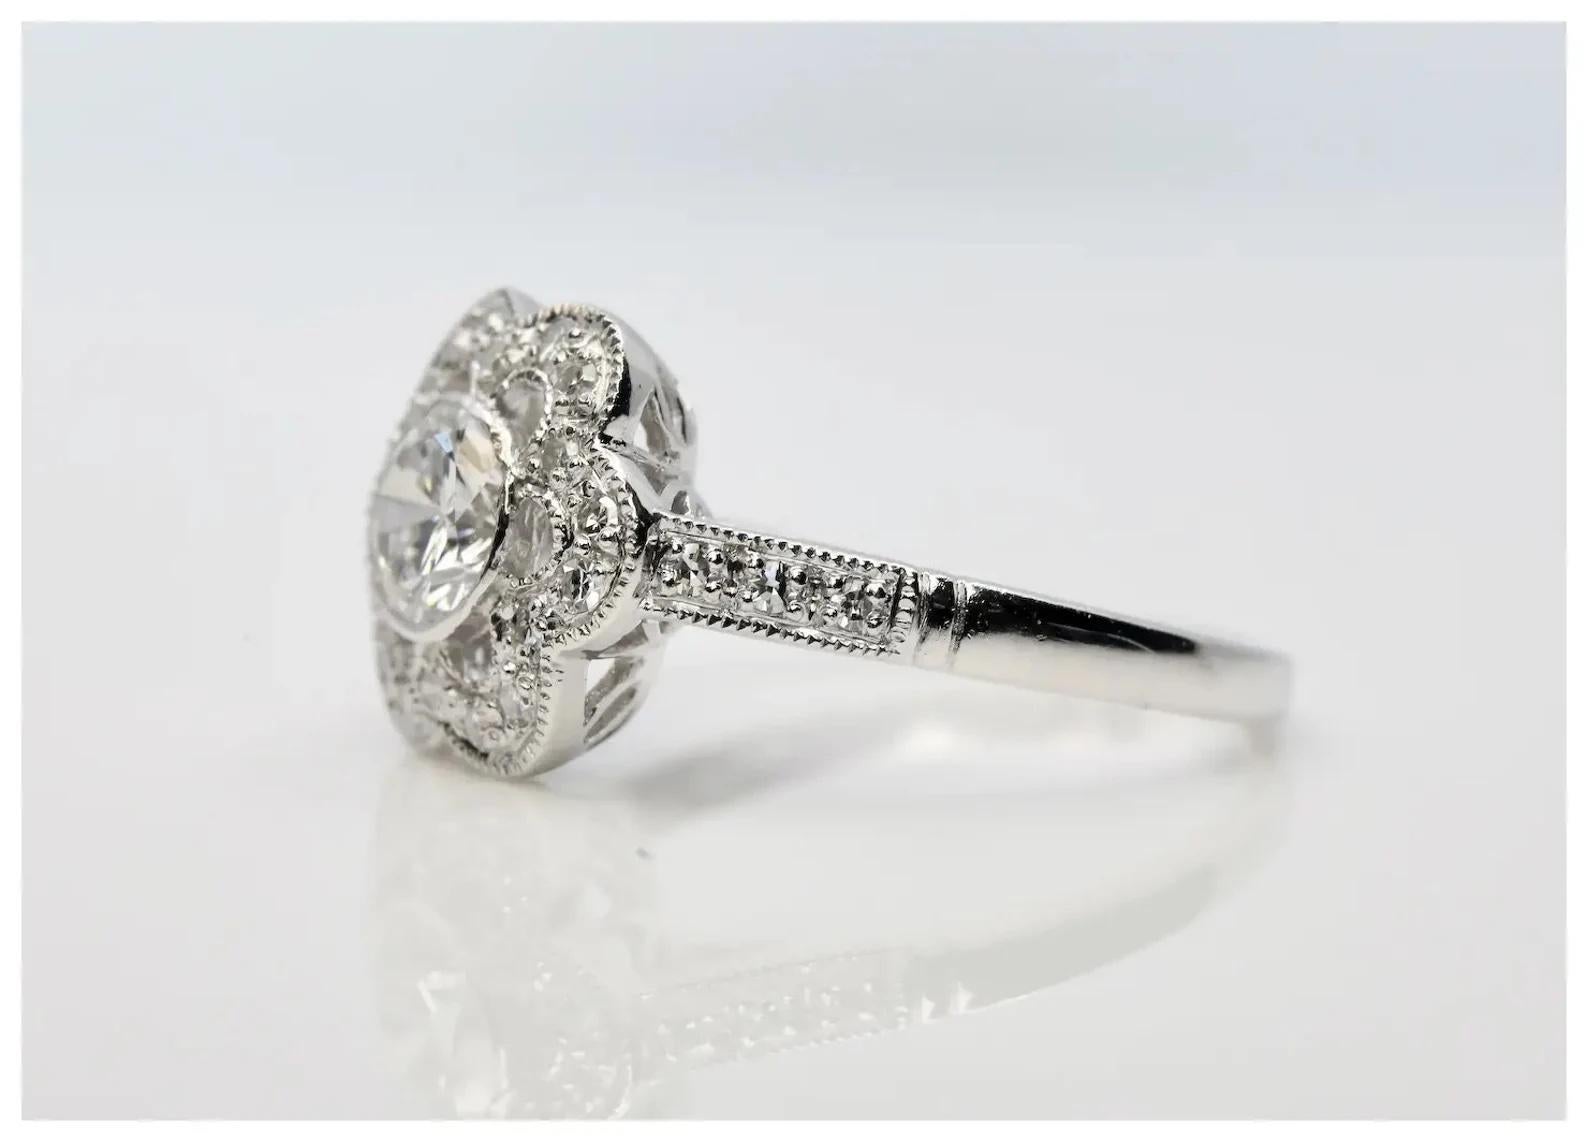 A chic floral motif diamond engagement ring in platinum.

Centered by a 0.55 carat round brilliant cut diamond of H color and VS1 clarity set in a polished platinum bezel.

Accented throughout in the petals of the flower and shoulders of the ring by